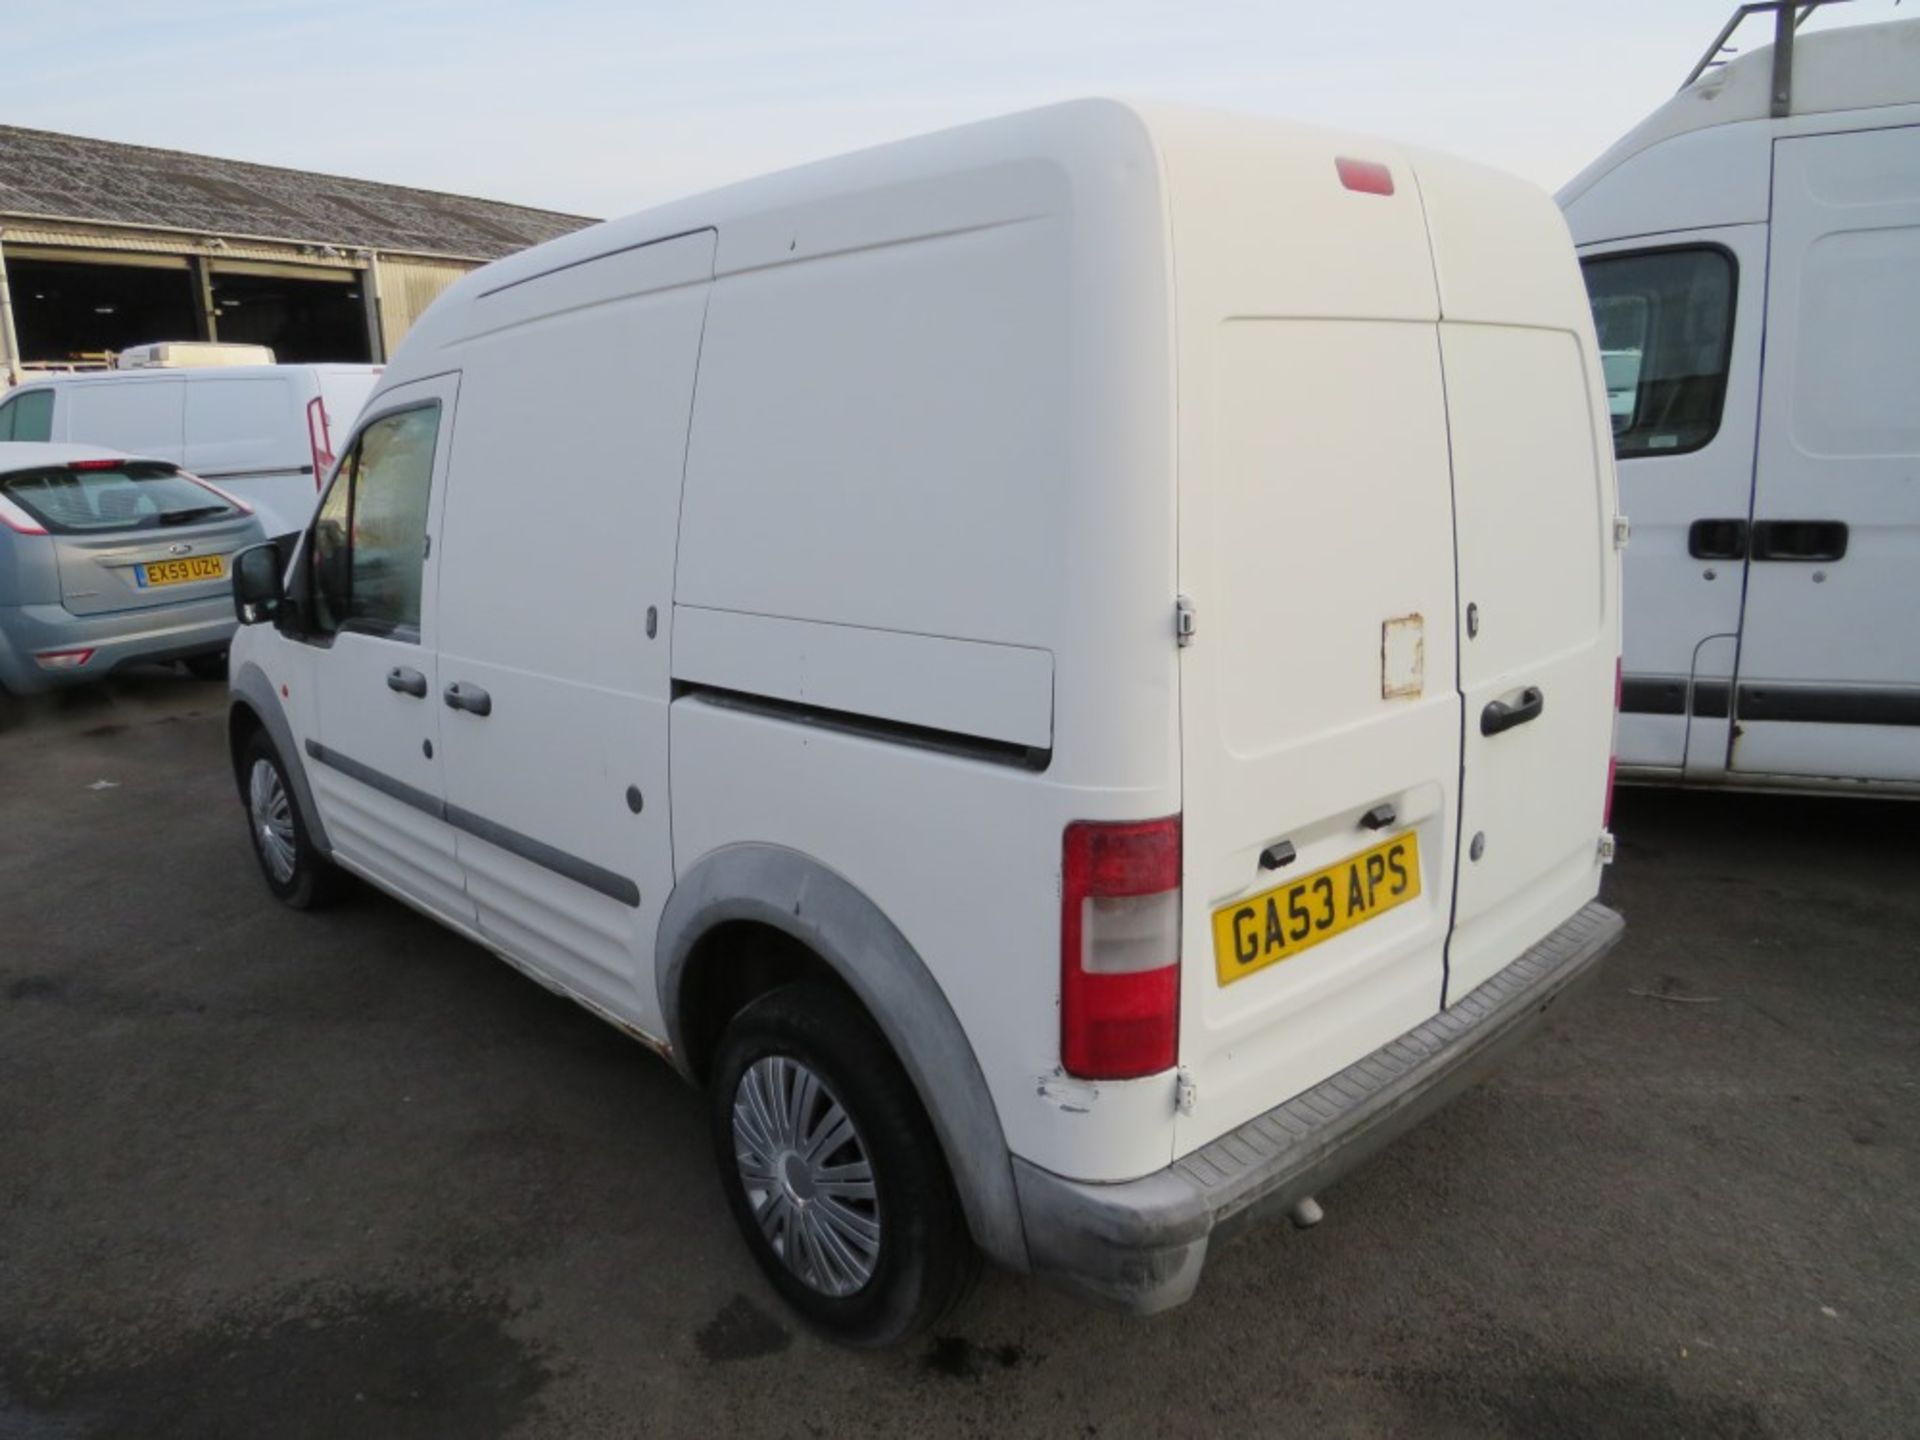 53 reg FORD TRANSIT CONNECT L230 D, TEST 01/20, 130320M NOT WARRANTED, V5 HERE, 10 FORMER KEEPERS [ - Image 3 of 6